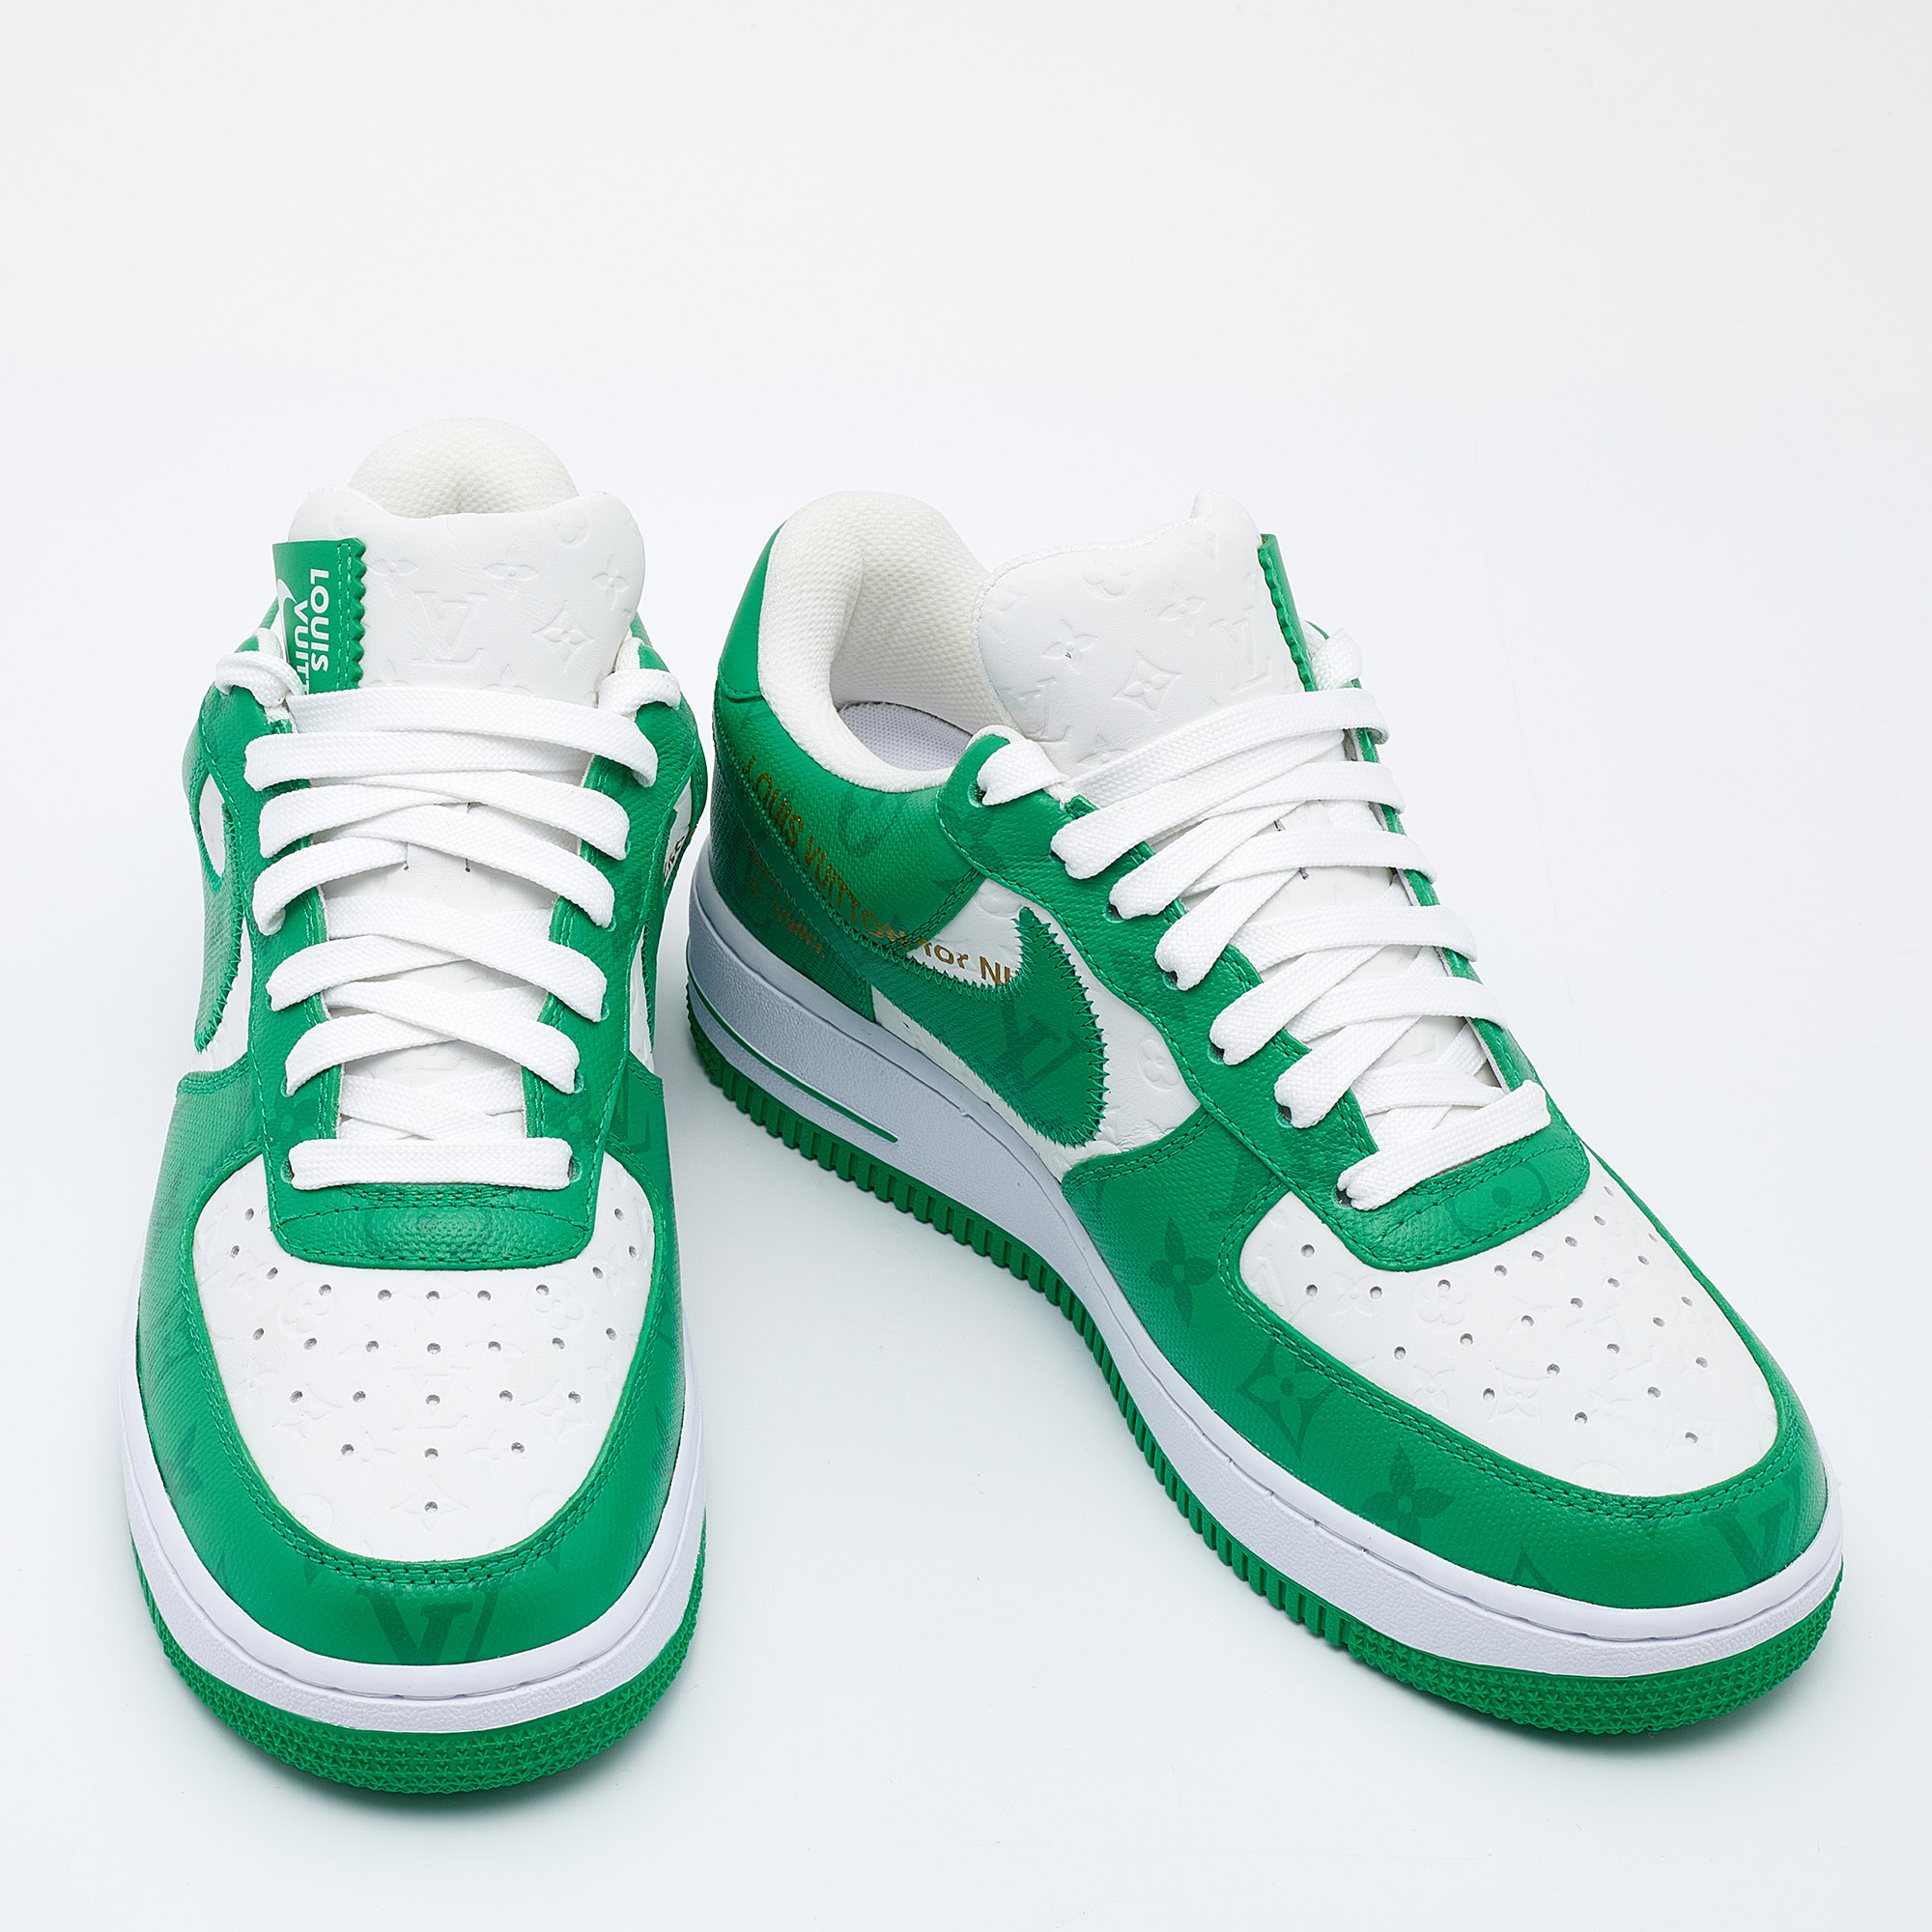 Louis Vuitton X Nike By Virgil Abloh Green/White Monogram Embossed Leather Nike Air Force 1 Low Top Sneakers Size 39